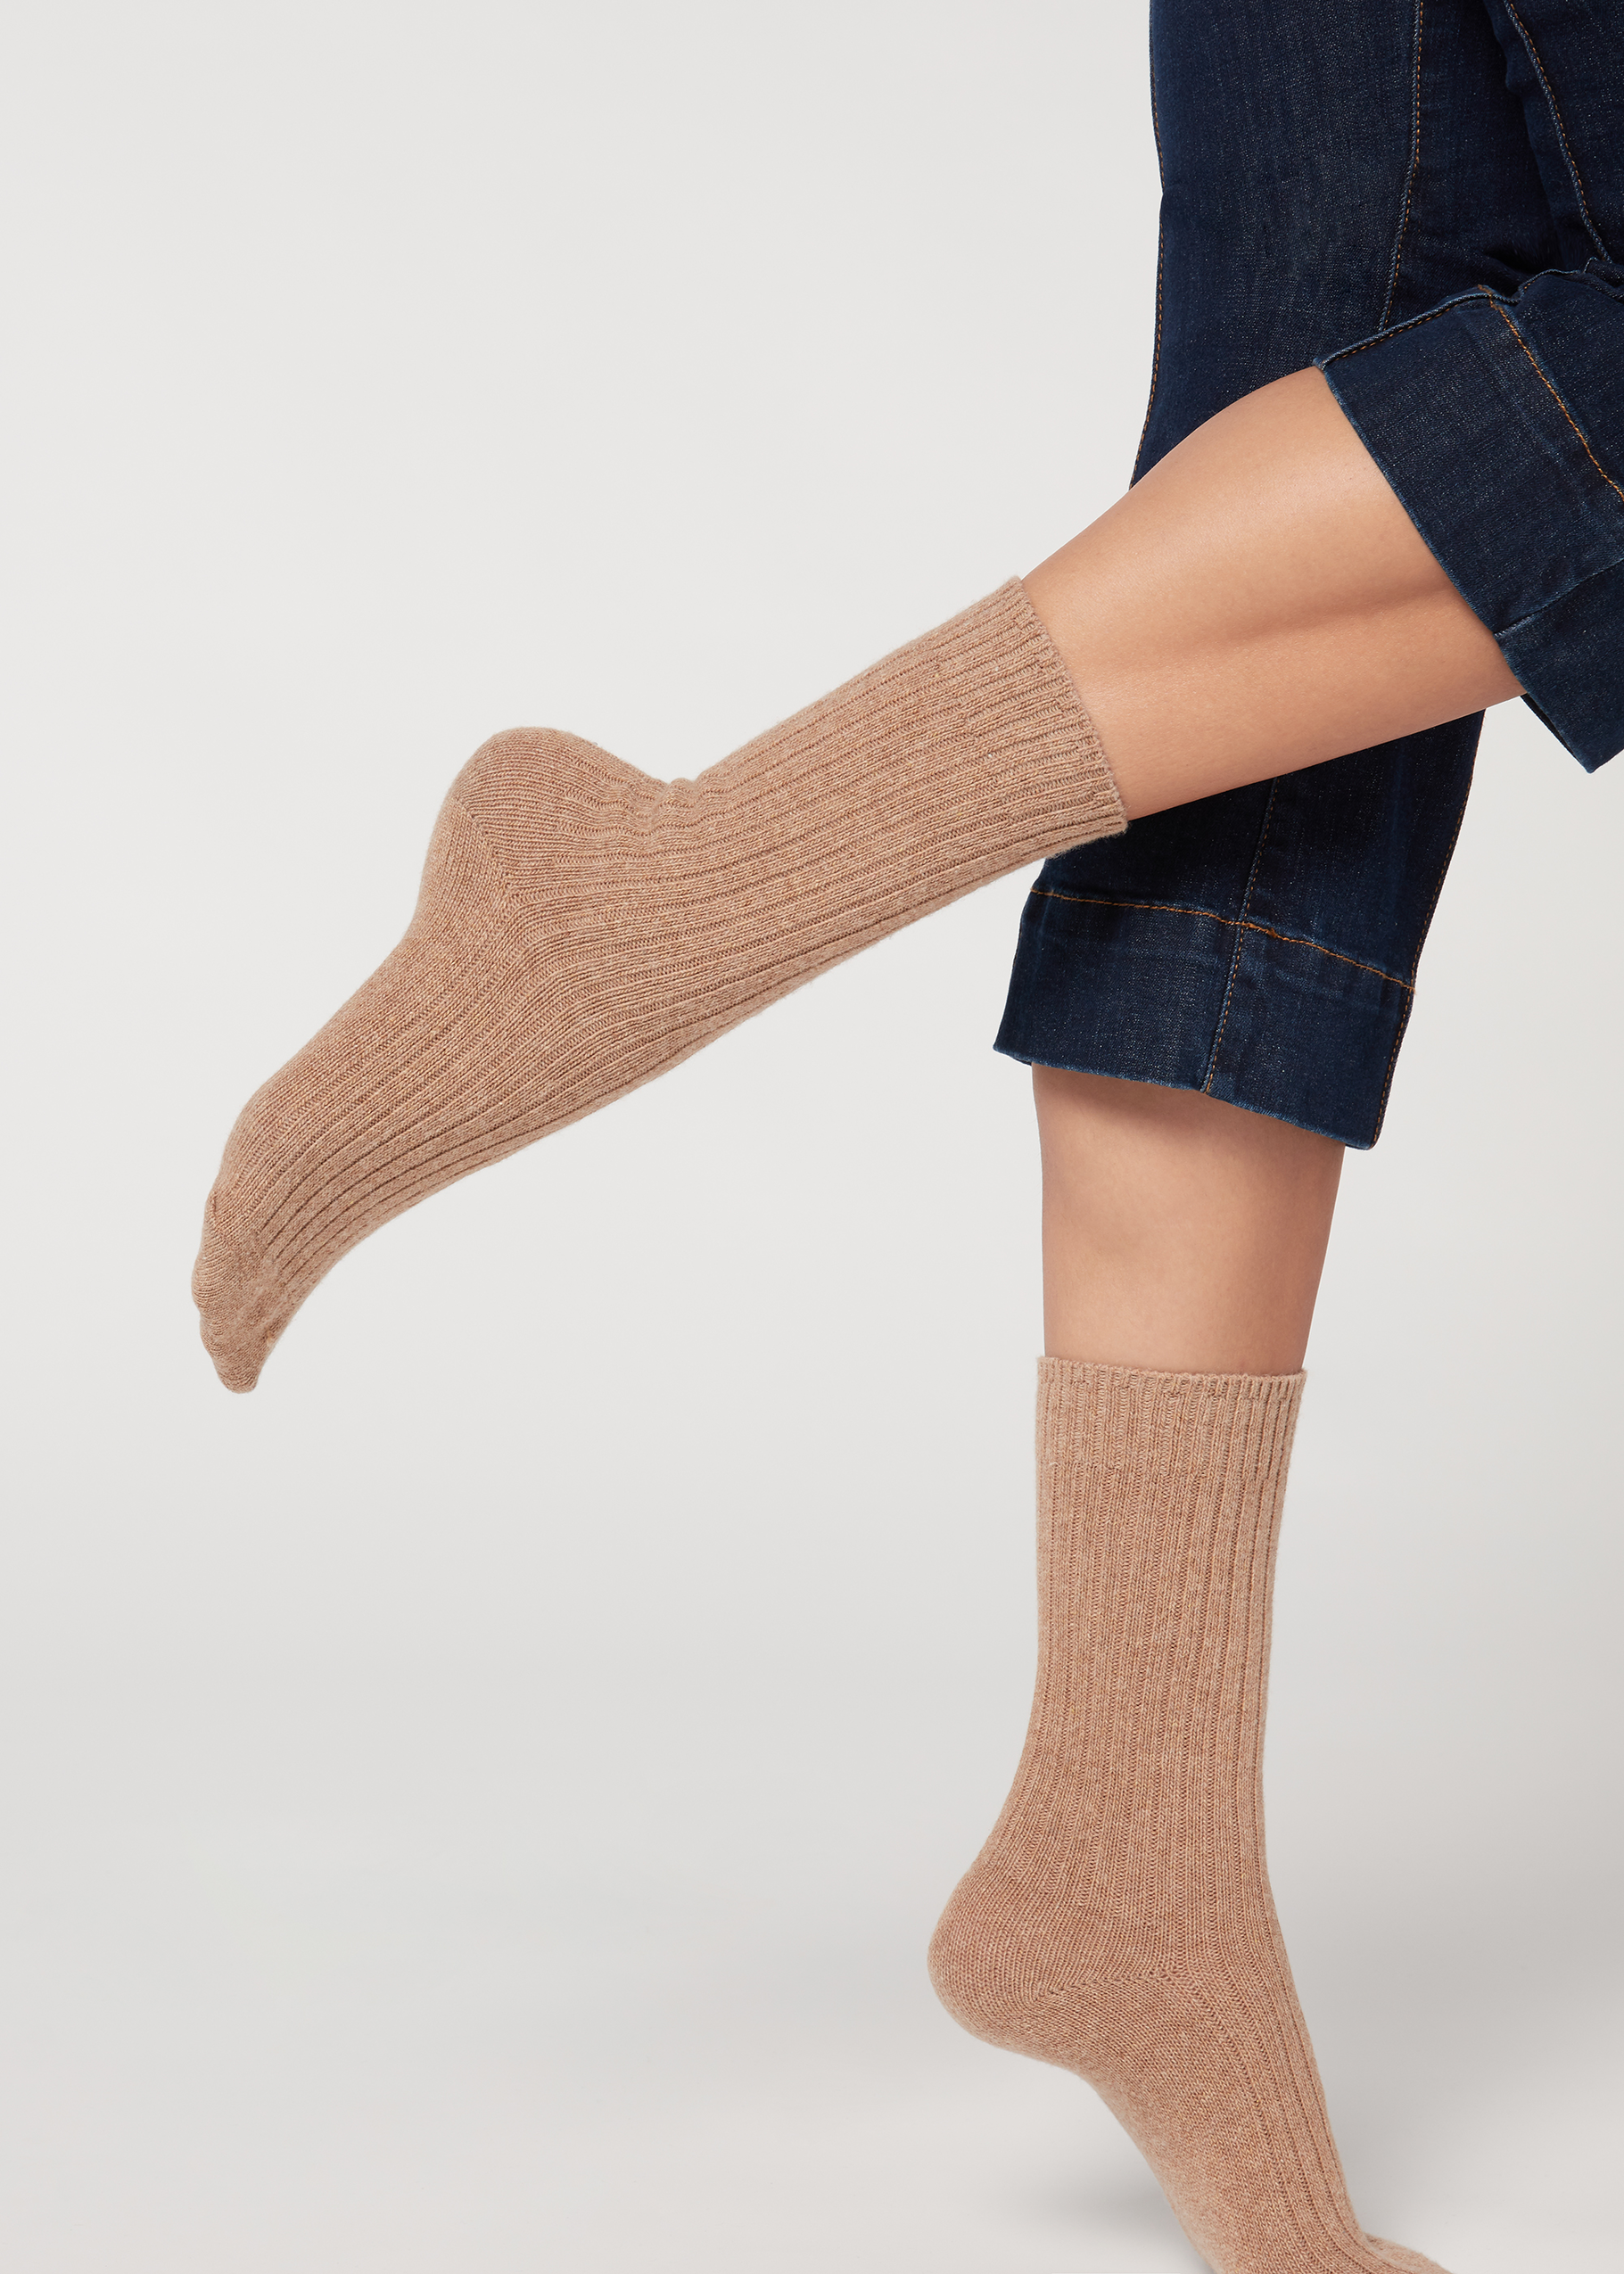 rash Accompany in terms of Short Ribbed Socks with Wool and Cashmere - Calzedonia